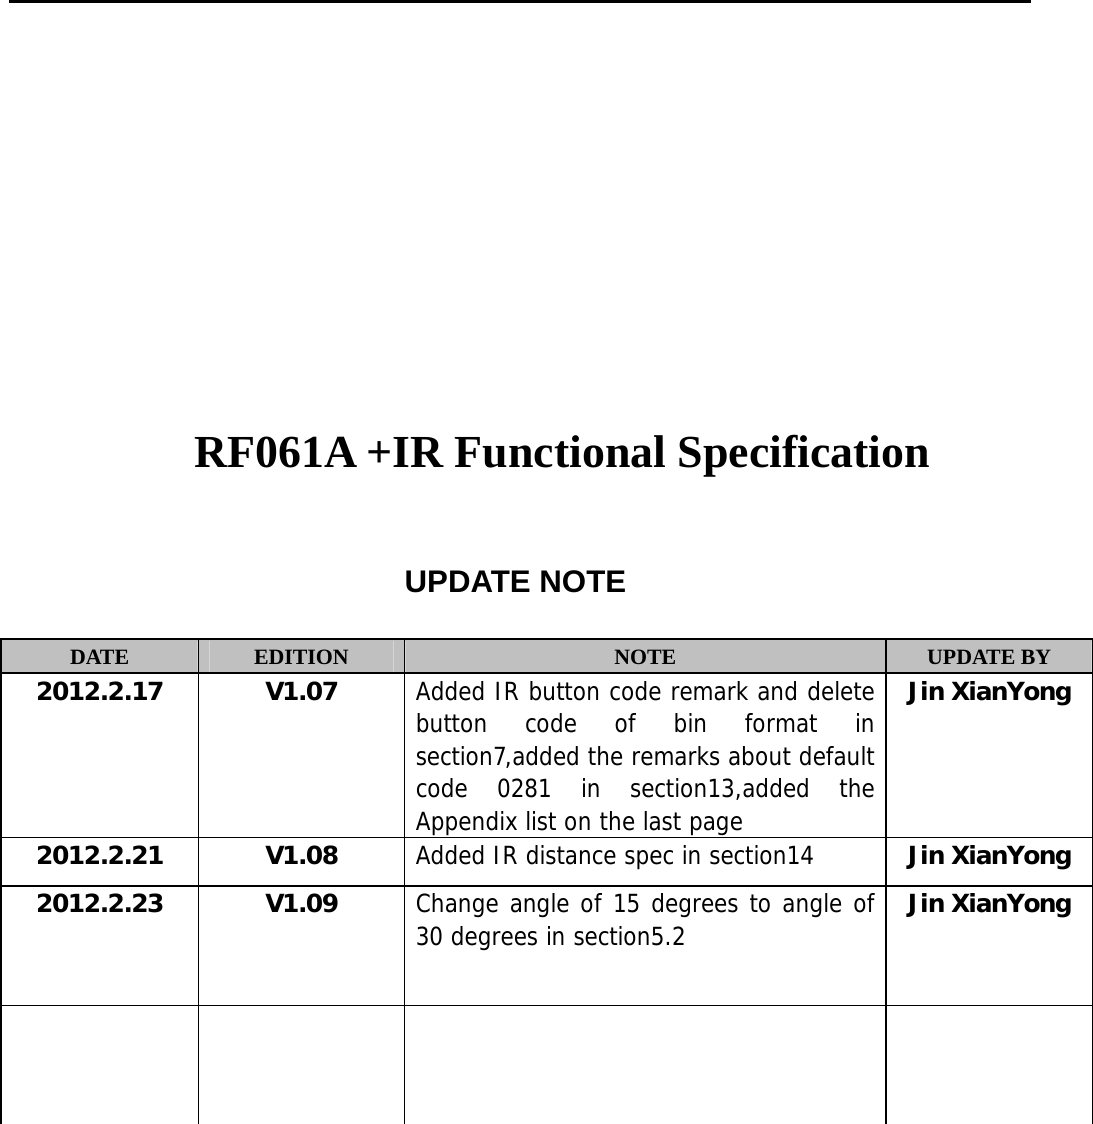                    RF061A +IR Functional Specification  UPDATE NOTE  DATE  EDITION  NOTE  UPDATE BY 2012.2.17 V1.07 Added IR button code remark and delete button code of bin format in section7,added the remarks about default code 0281 in section13,added the Appendix list on the last page Jin XianYong 2012.2.21 V1.08 Added IR distance spec in section14  Jin XianYong 2012.2.23 V1.09 Change angle of 15 degrees to angle of 30 degrees in section5.2  Jin XianYong                  